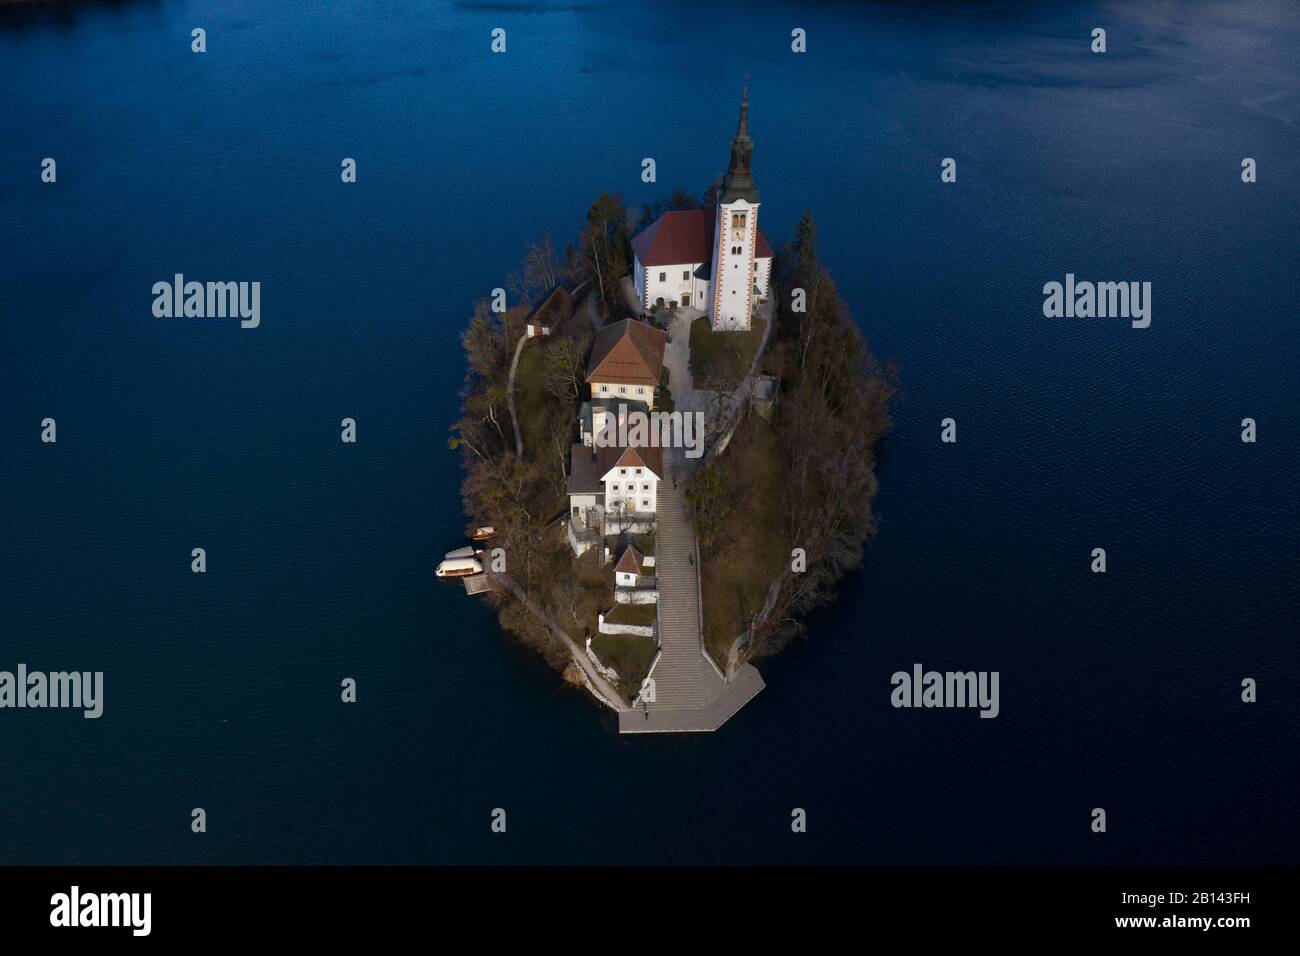 Marienkirche on a small island of Lake Bled, Bled, Slovenia Stock Photo